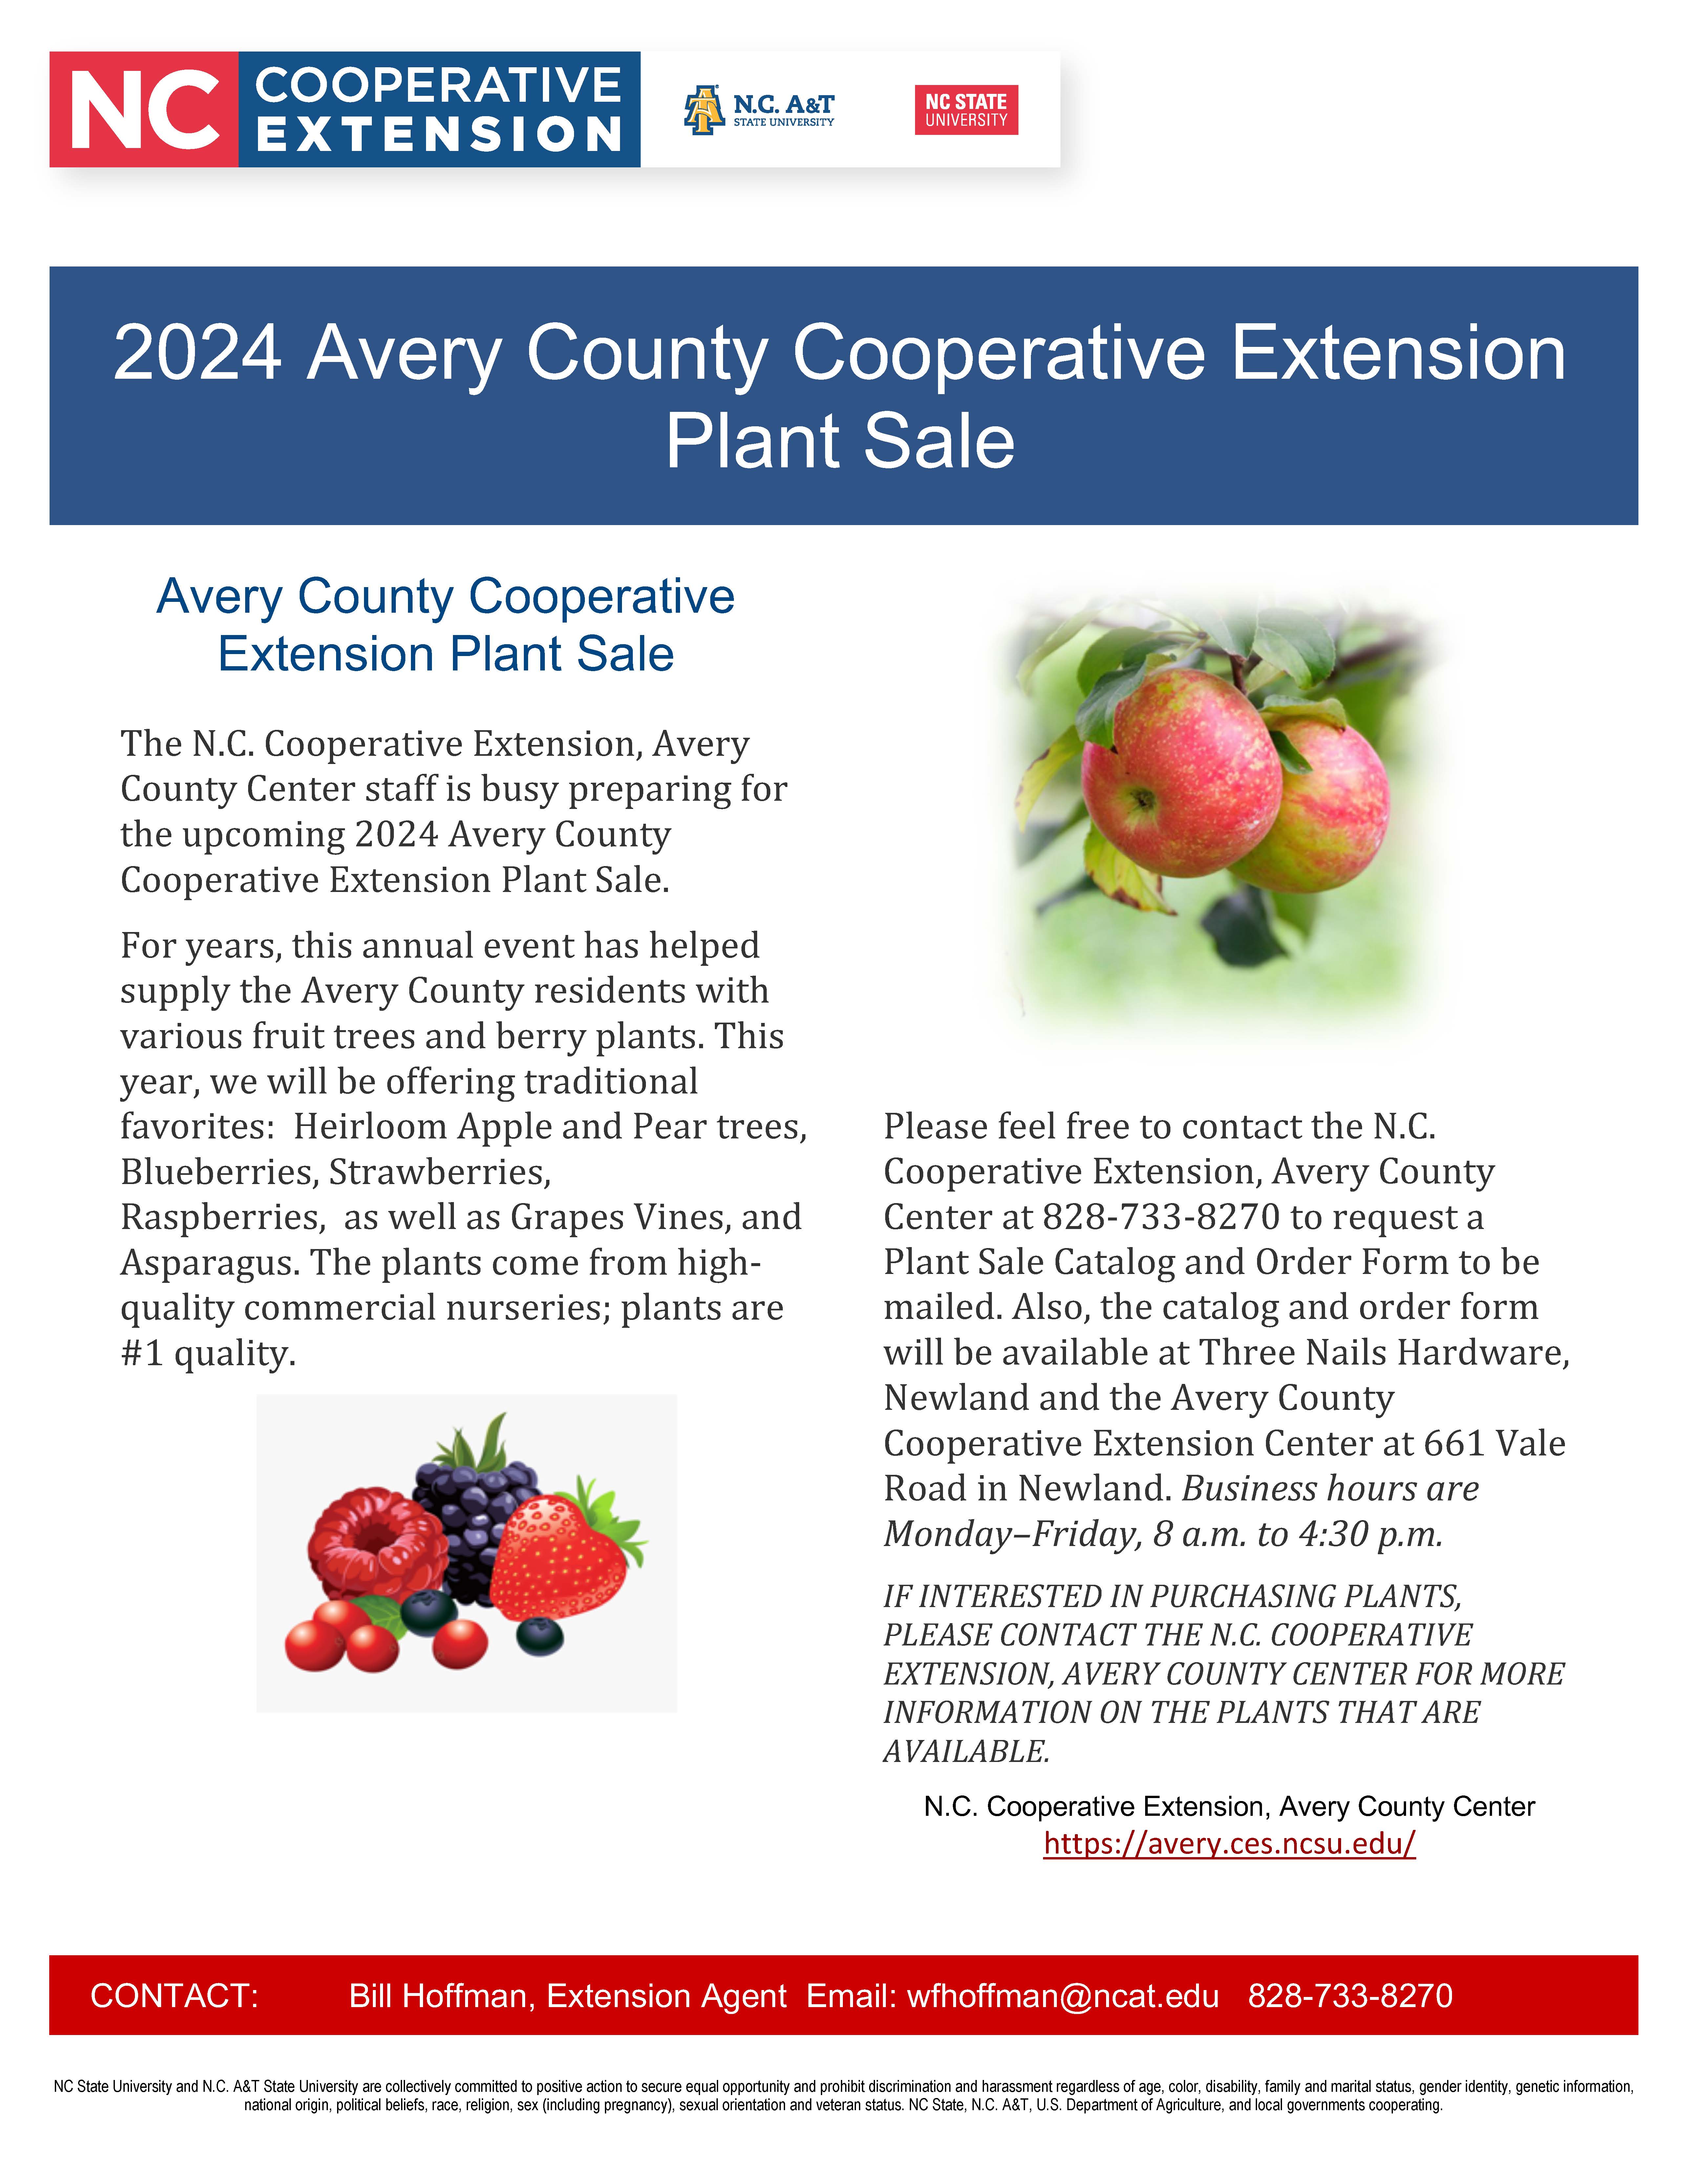 The N.C. Cooperative Extension, Avery County Center staff is busy preparing for the upcoming 2024 Avery County Cooperative Extension Plant Sale. For years, this annual event has helped supply the Avery County residents with various fruit trees and berry plants. This year, we will be offering traditional favorites: Heirloom Apple and Pear trees, Blueberries, Strawberries, Raspberries, as well as Grapes Vines, and Asparagus. The plants come from high- quality commercial nurseries; plants are #1 quality.